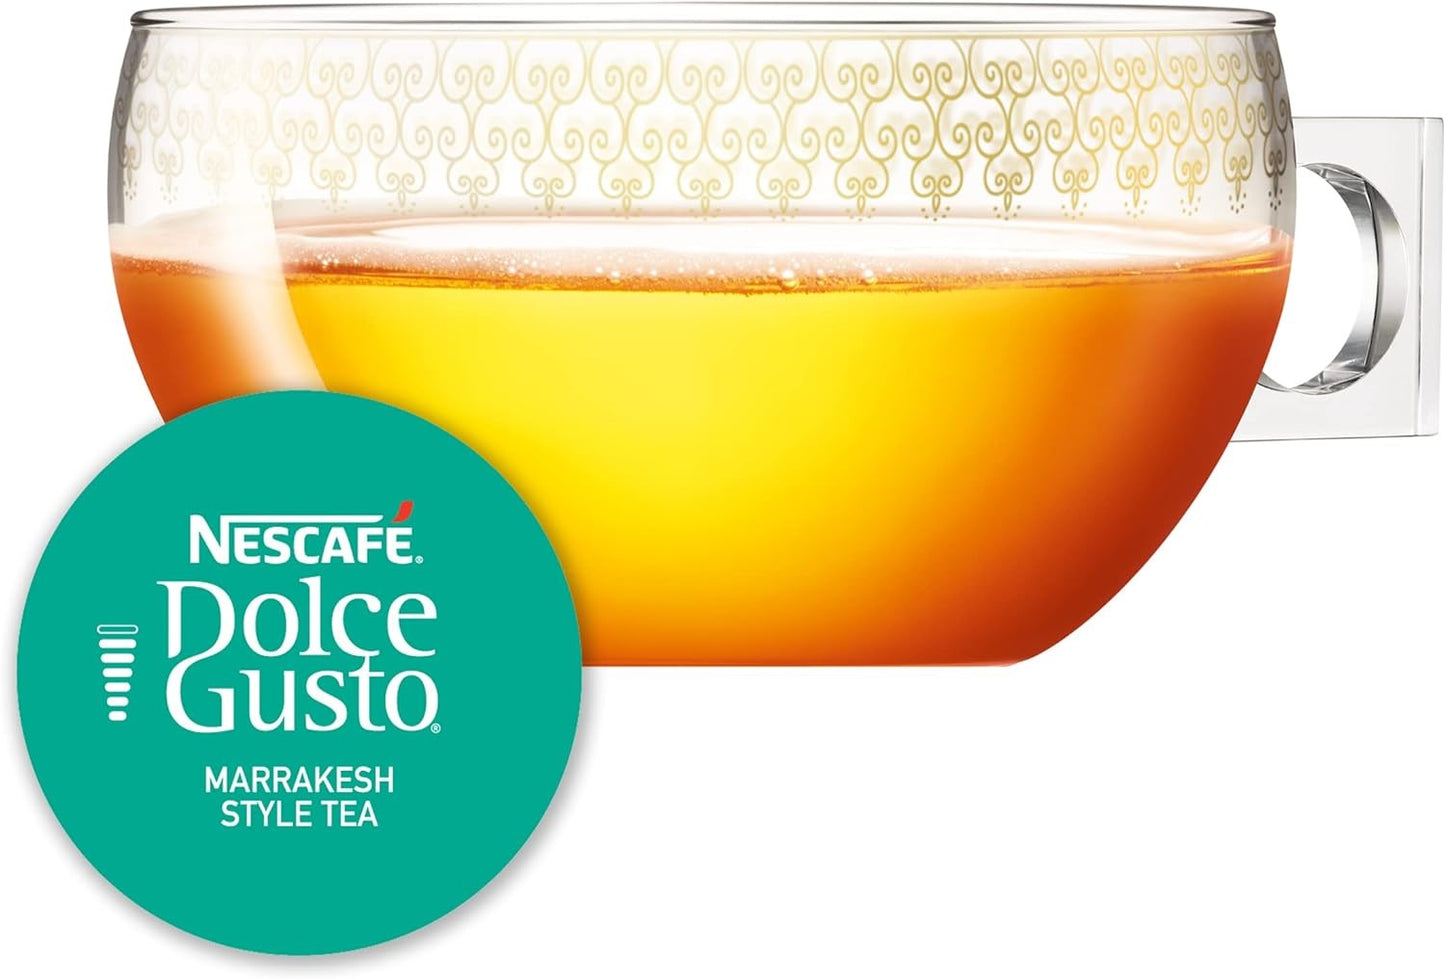 Marrakesh Style Tea 48 capsules Dolce Gusto